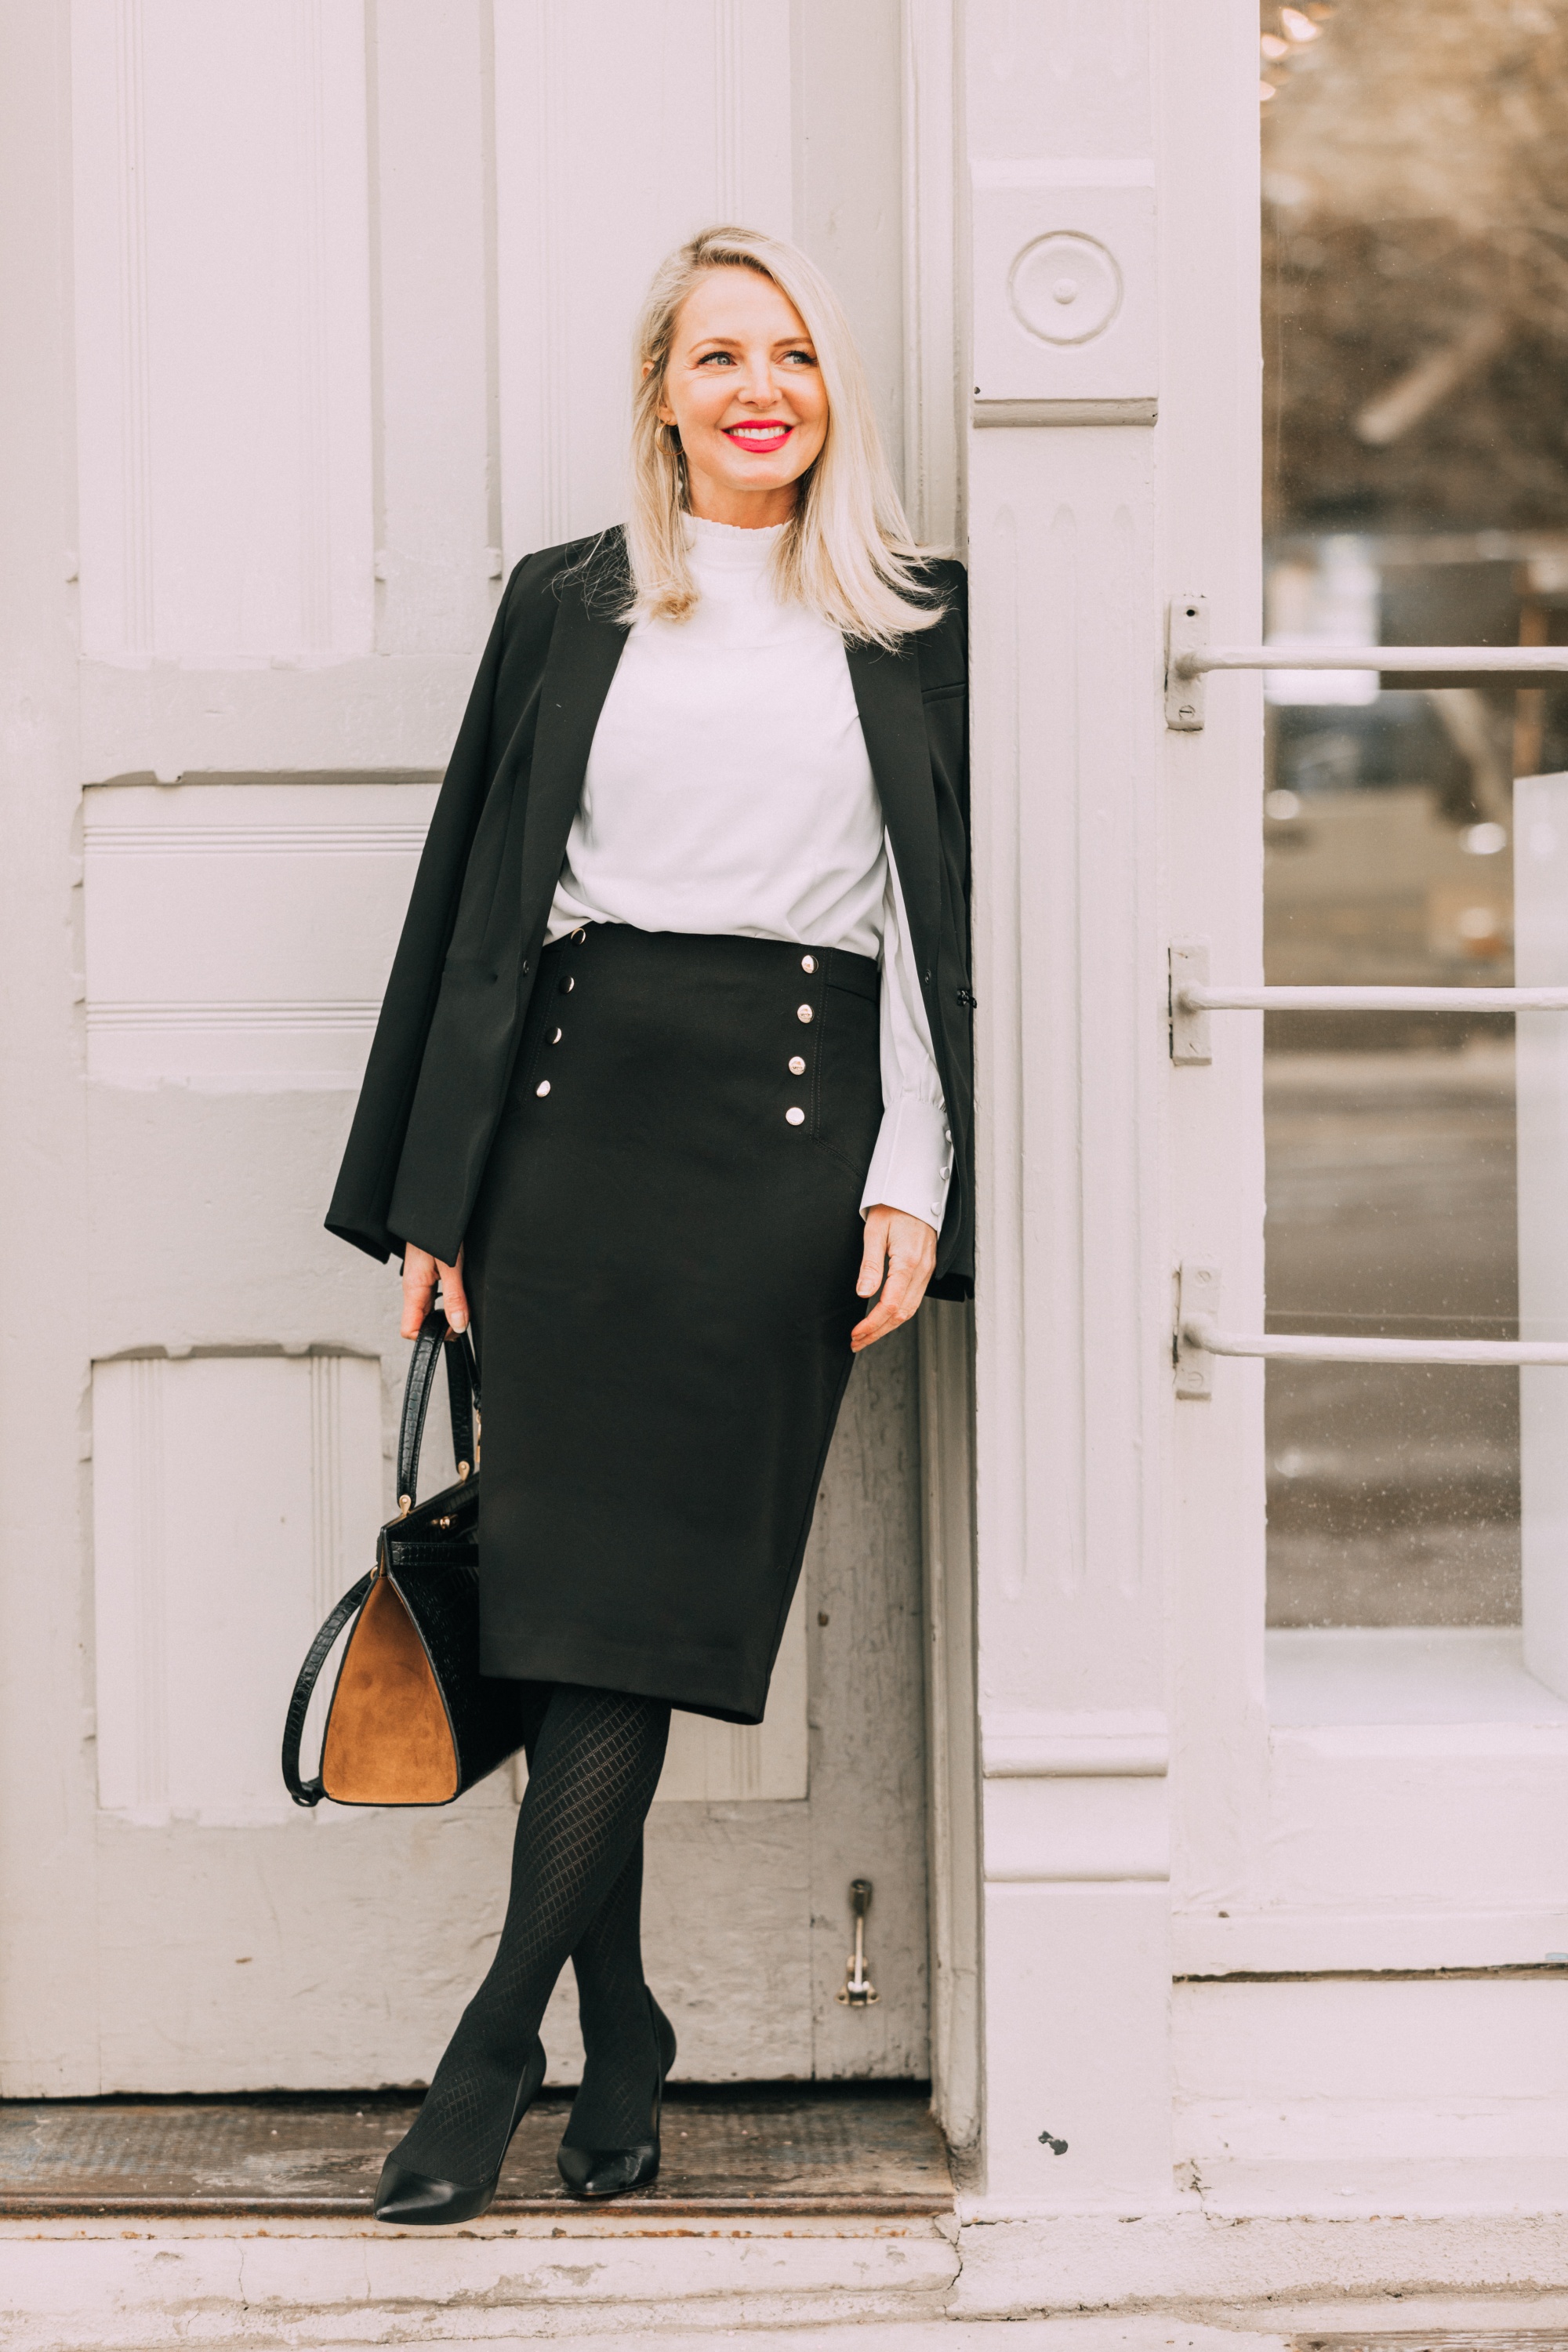 Wardrobe Basics, Fashion blogger Erin Busbee of BusbeeStyle.com sharing wardrobe basics from Ann Taylor wearing a black pencil skirt with sailir buttons, a white ruffle neck blouse, classic black blazer, black tights, and black pumps all from Ann Taylor in Telluride, Colorado